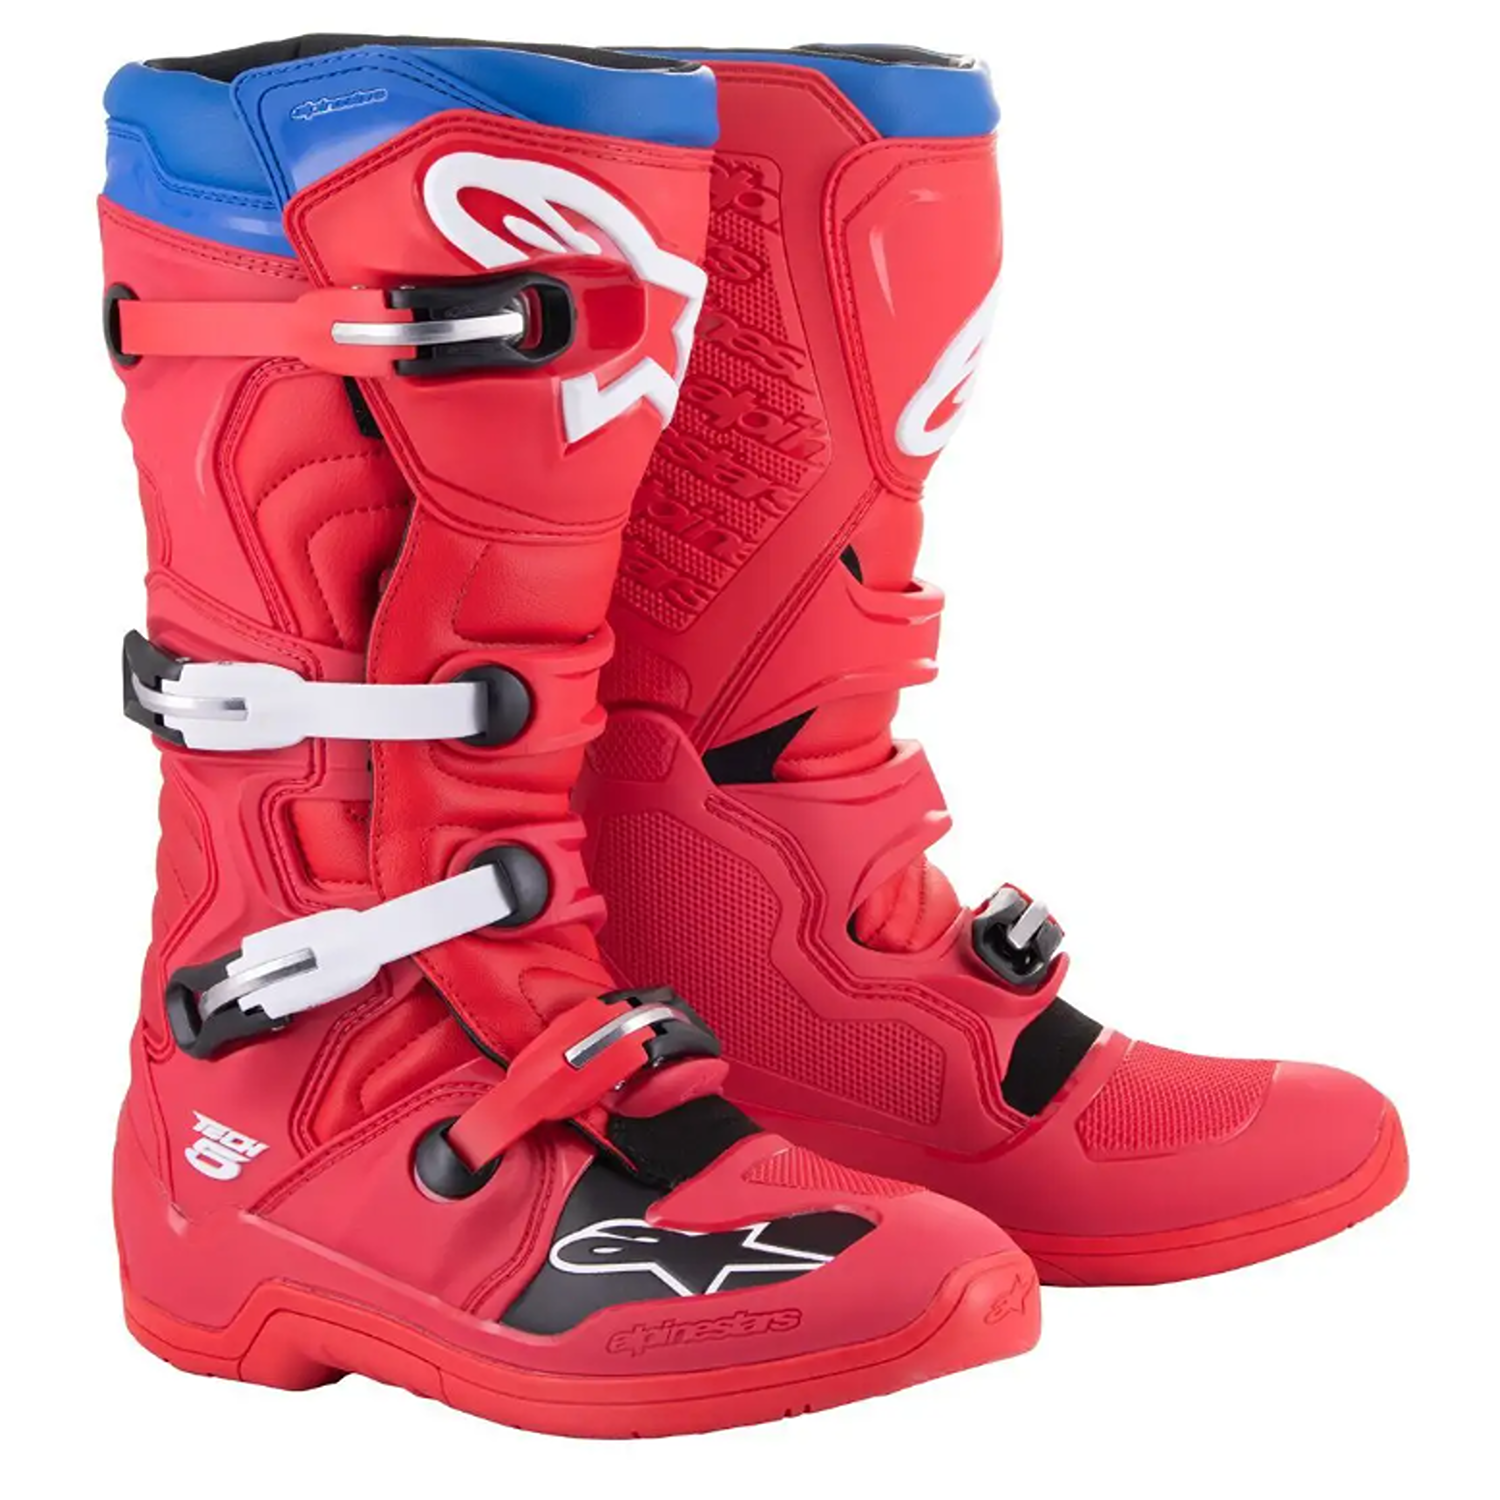 Image of EU Alpinestars Tech 5 Boots Bright Red Dark Red Blue Taille US 16